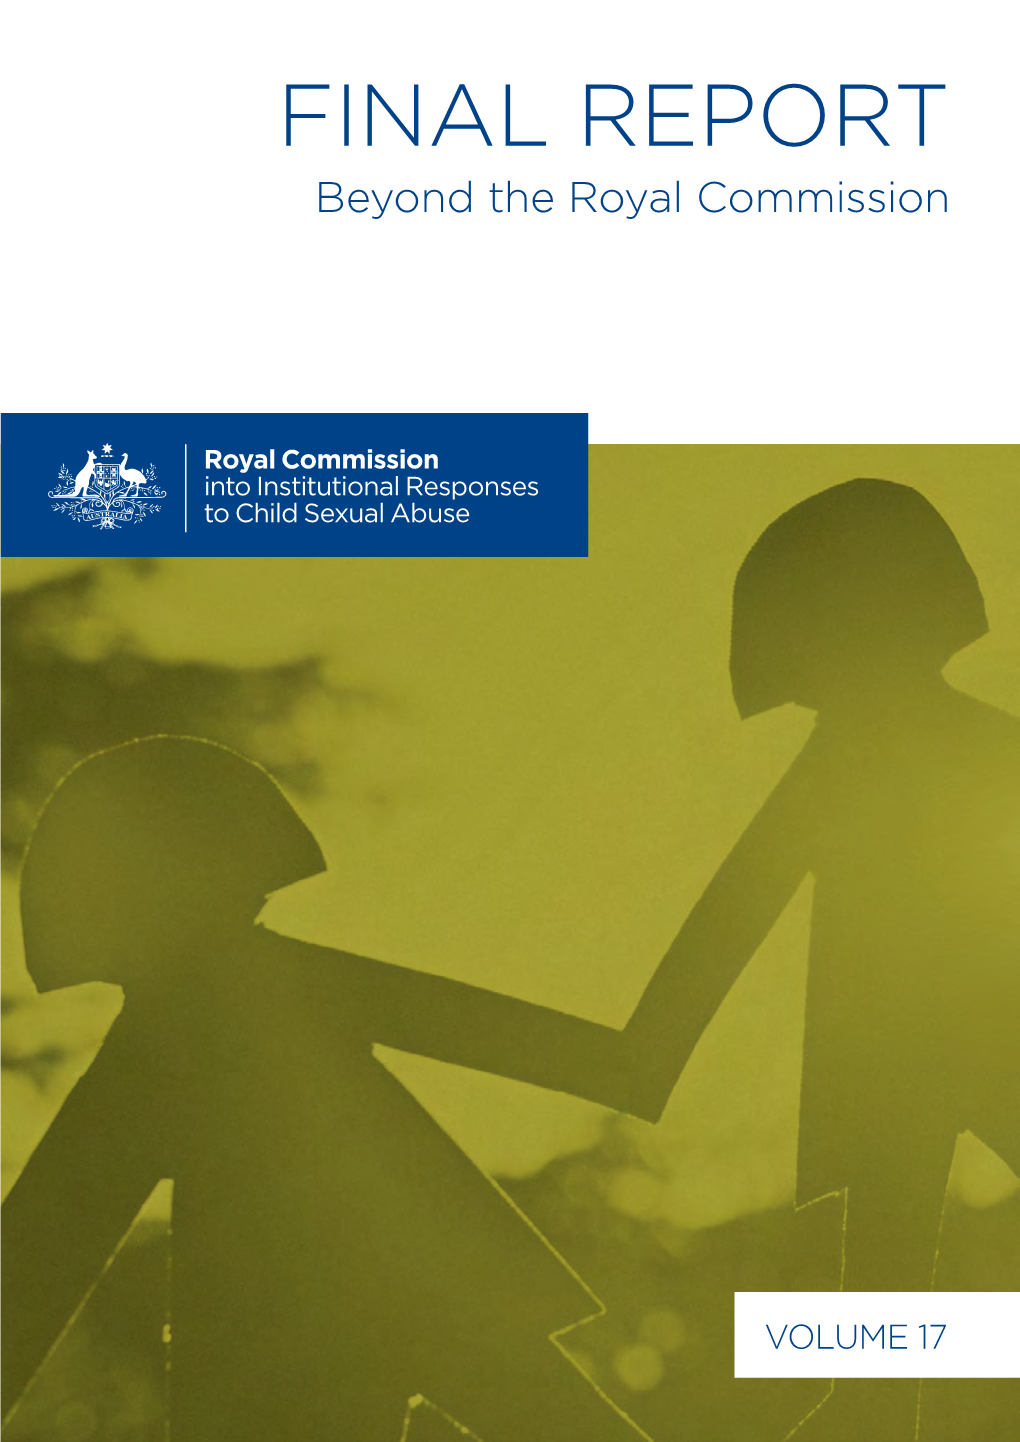 Volume 17, Beyond the Royal Commission FINAL REPORT Volume 17 Beyond the Royal Commission